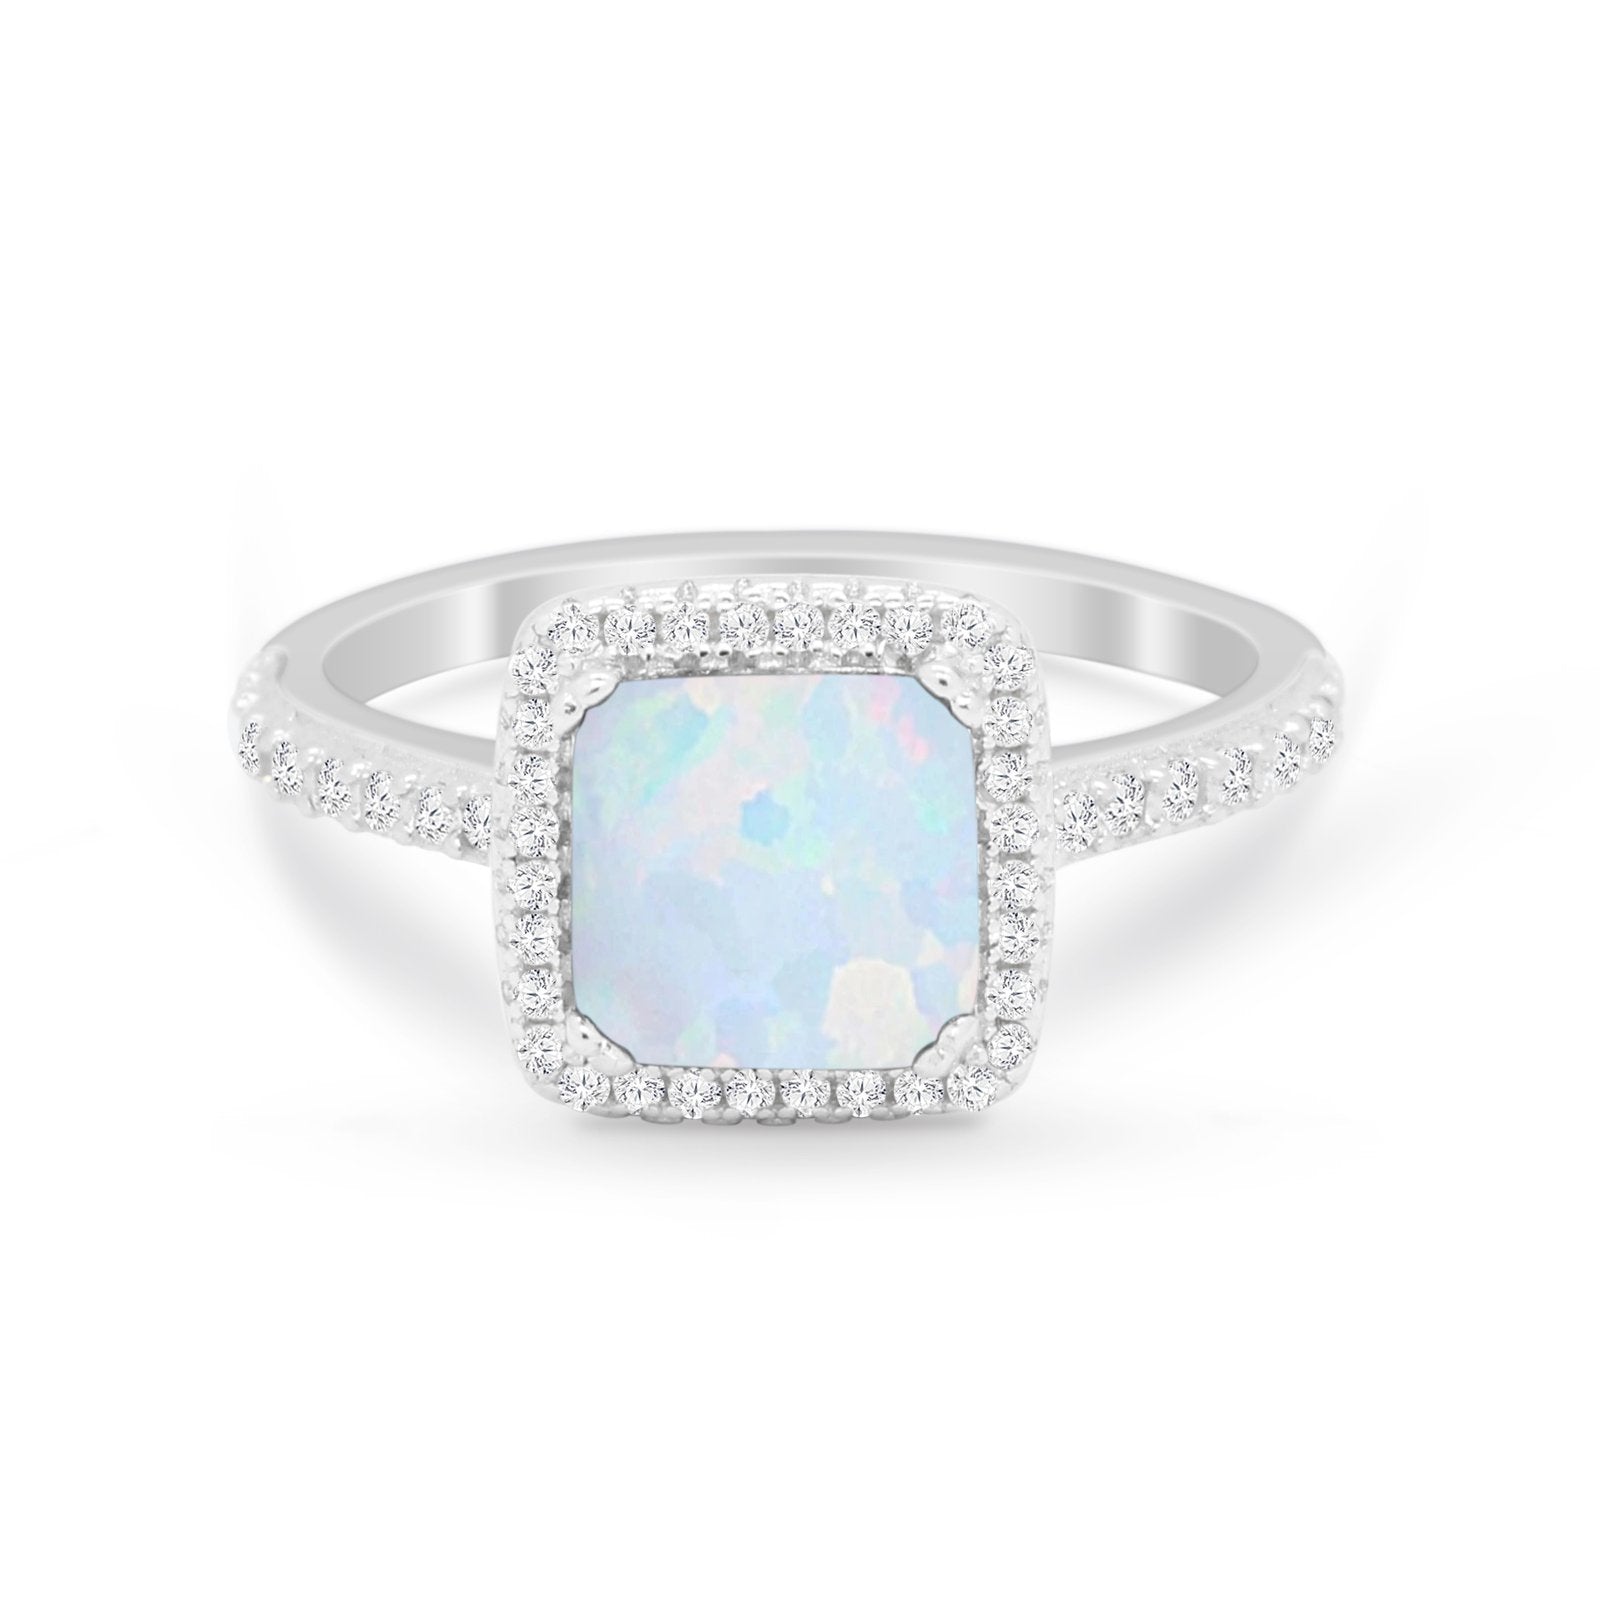 Halo Princess Cut Wedding Ring Lab Created White Opal 925 Sterling Silver